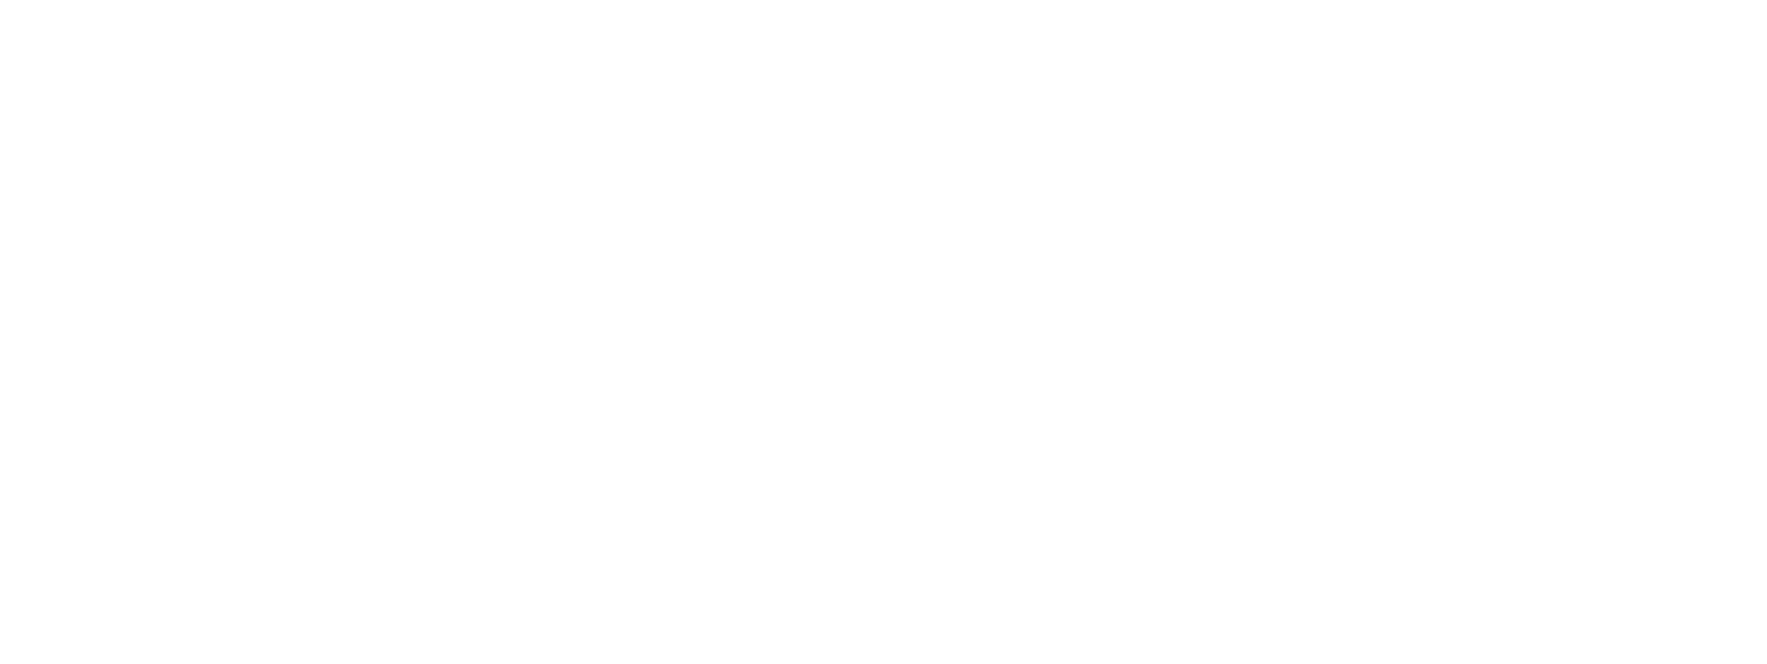 BLUE base AND SILVER